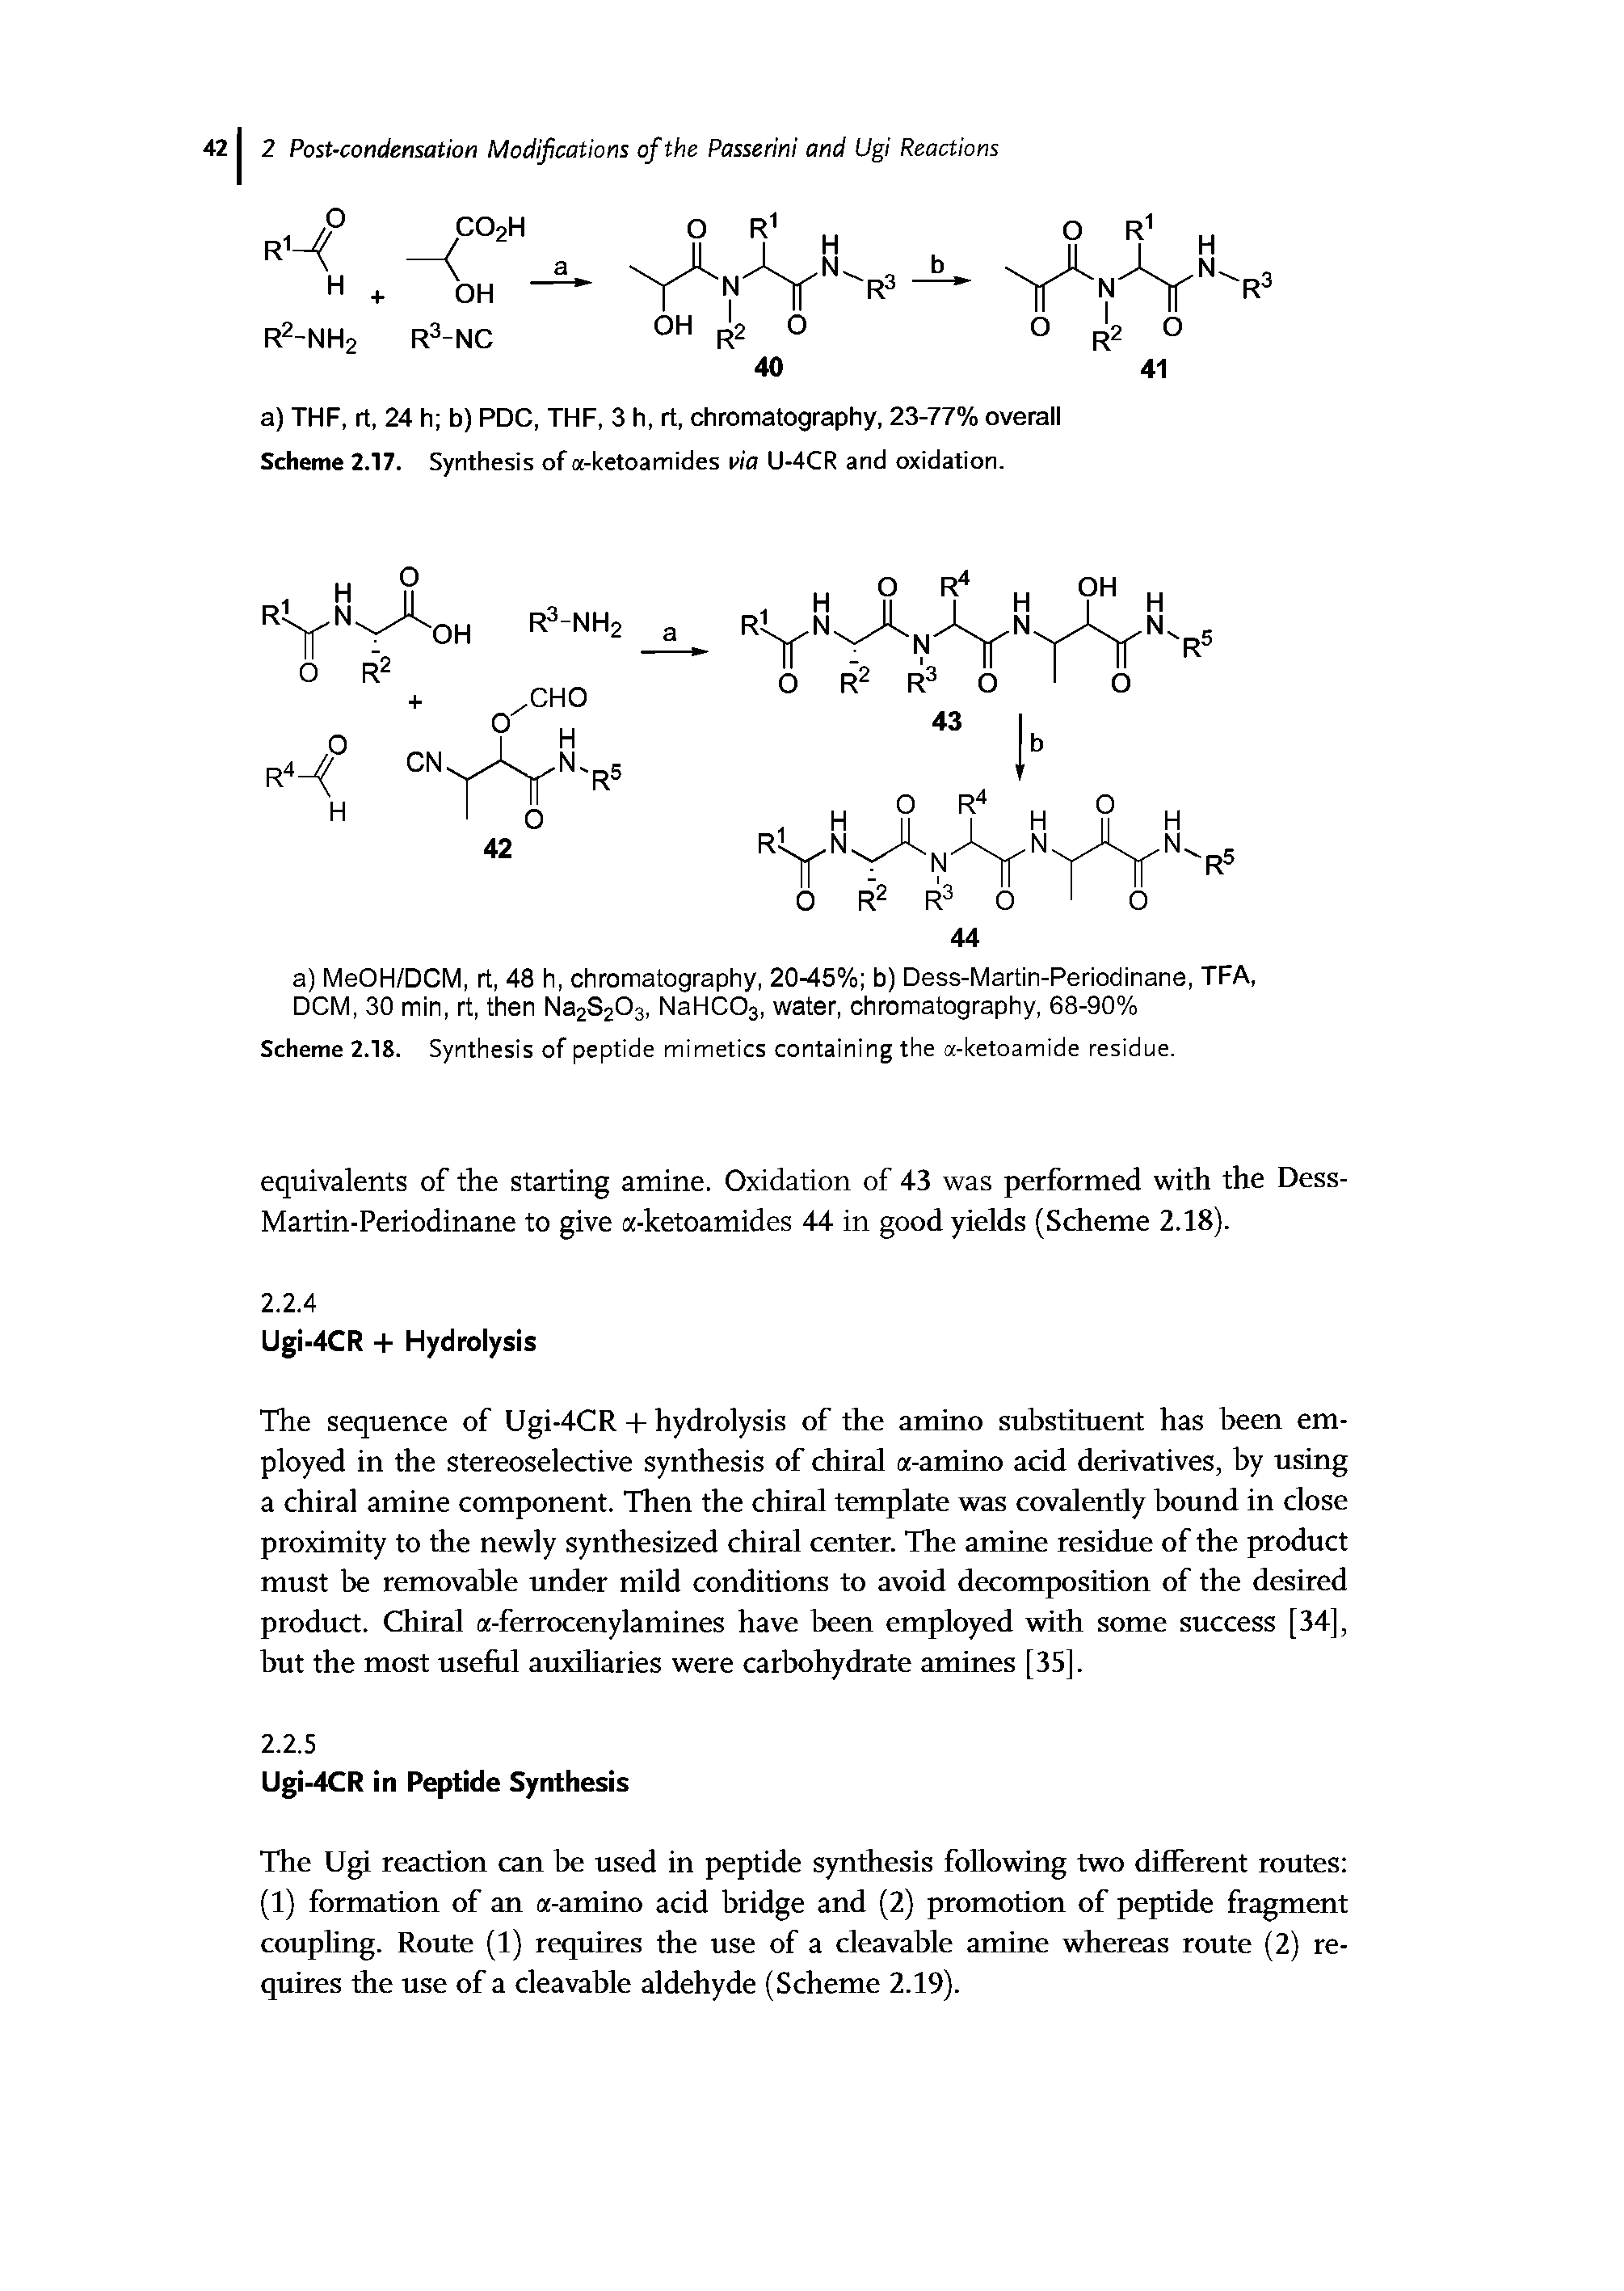 Scheme 2.18. Synthesis of peptide mimetics containing the a-ketoamide residue.